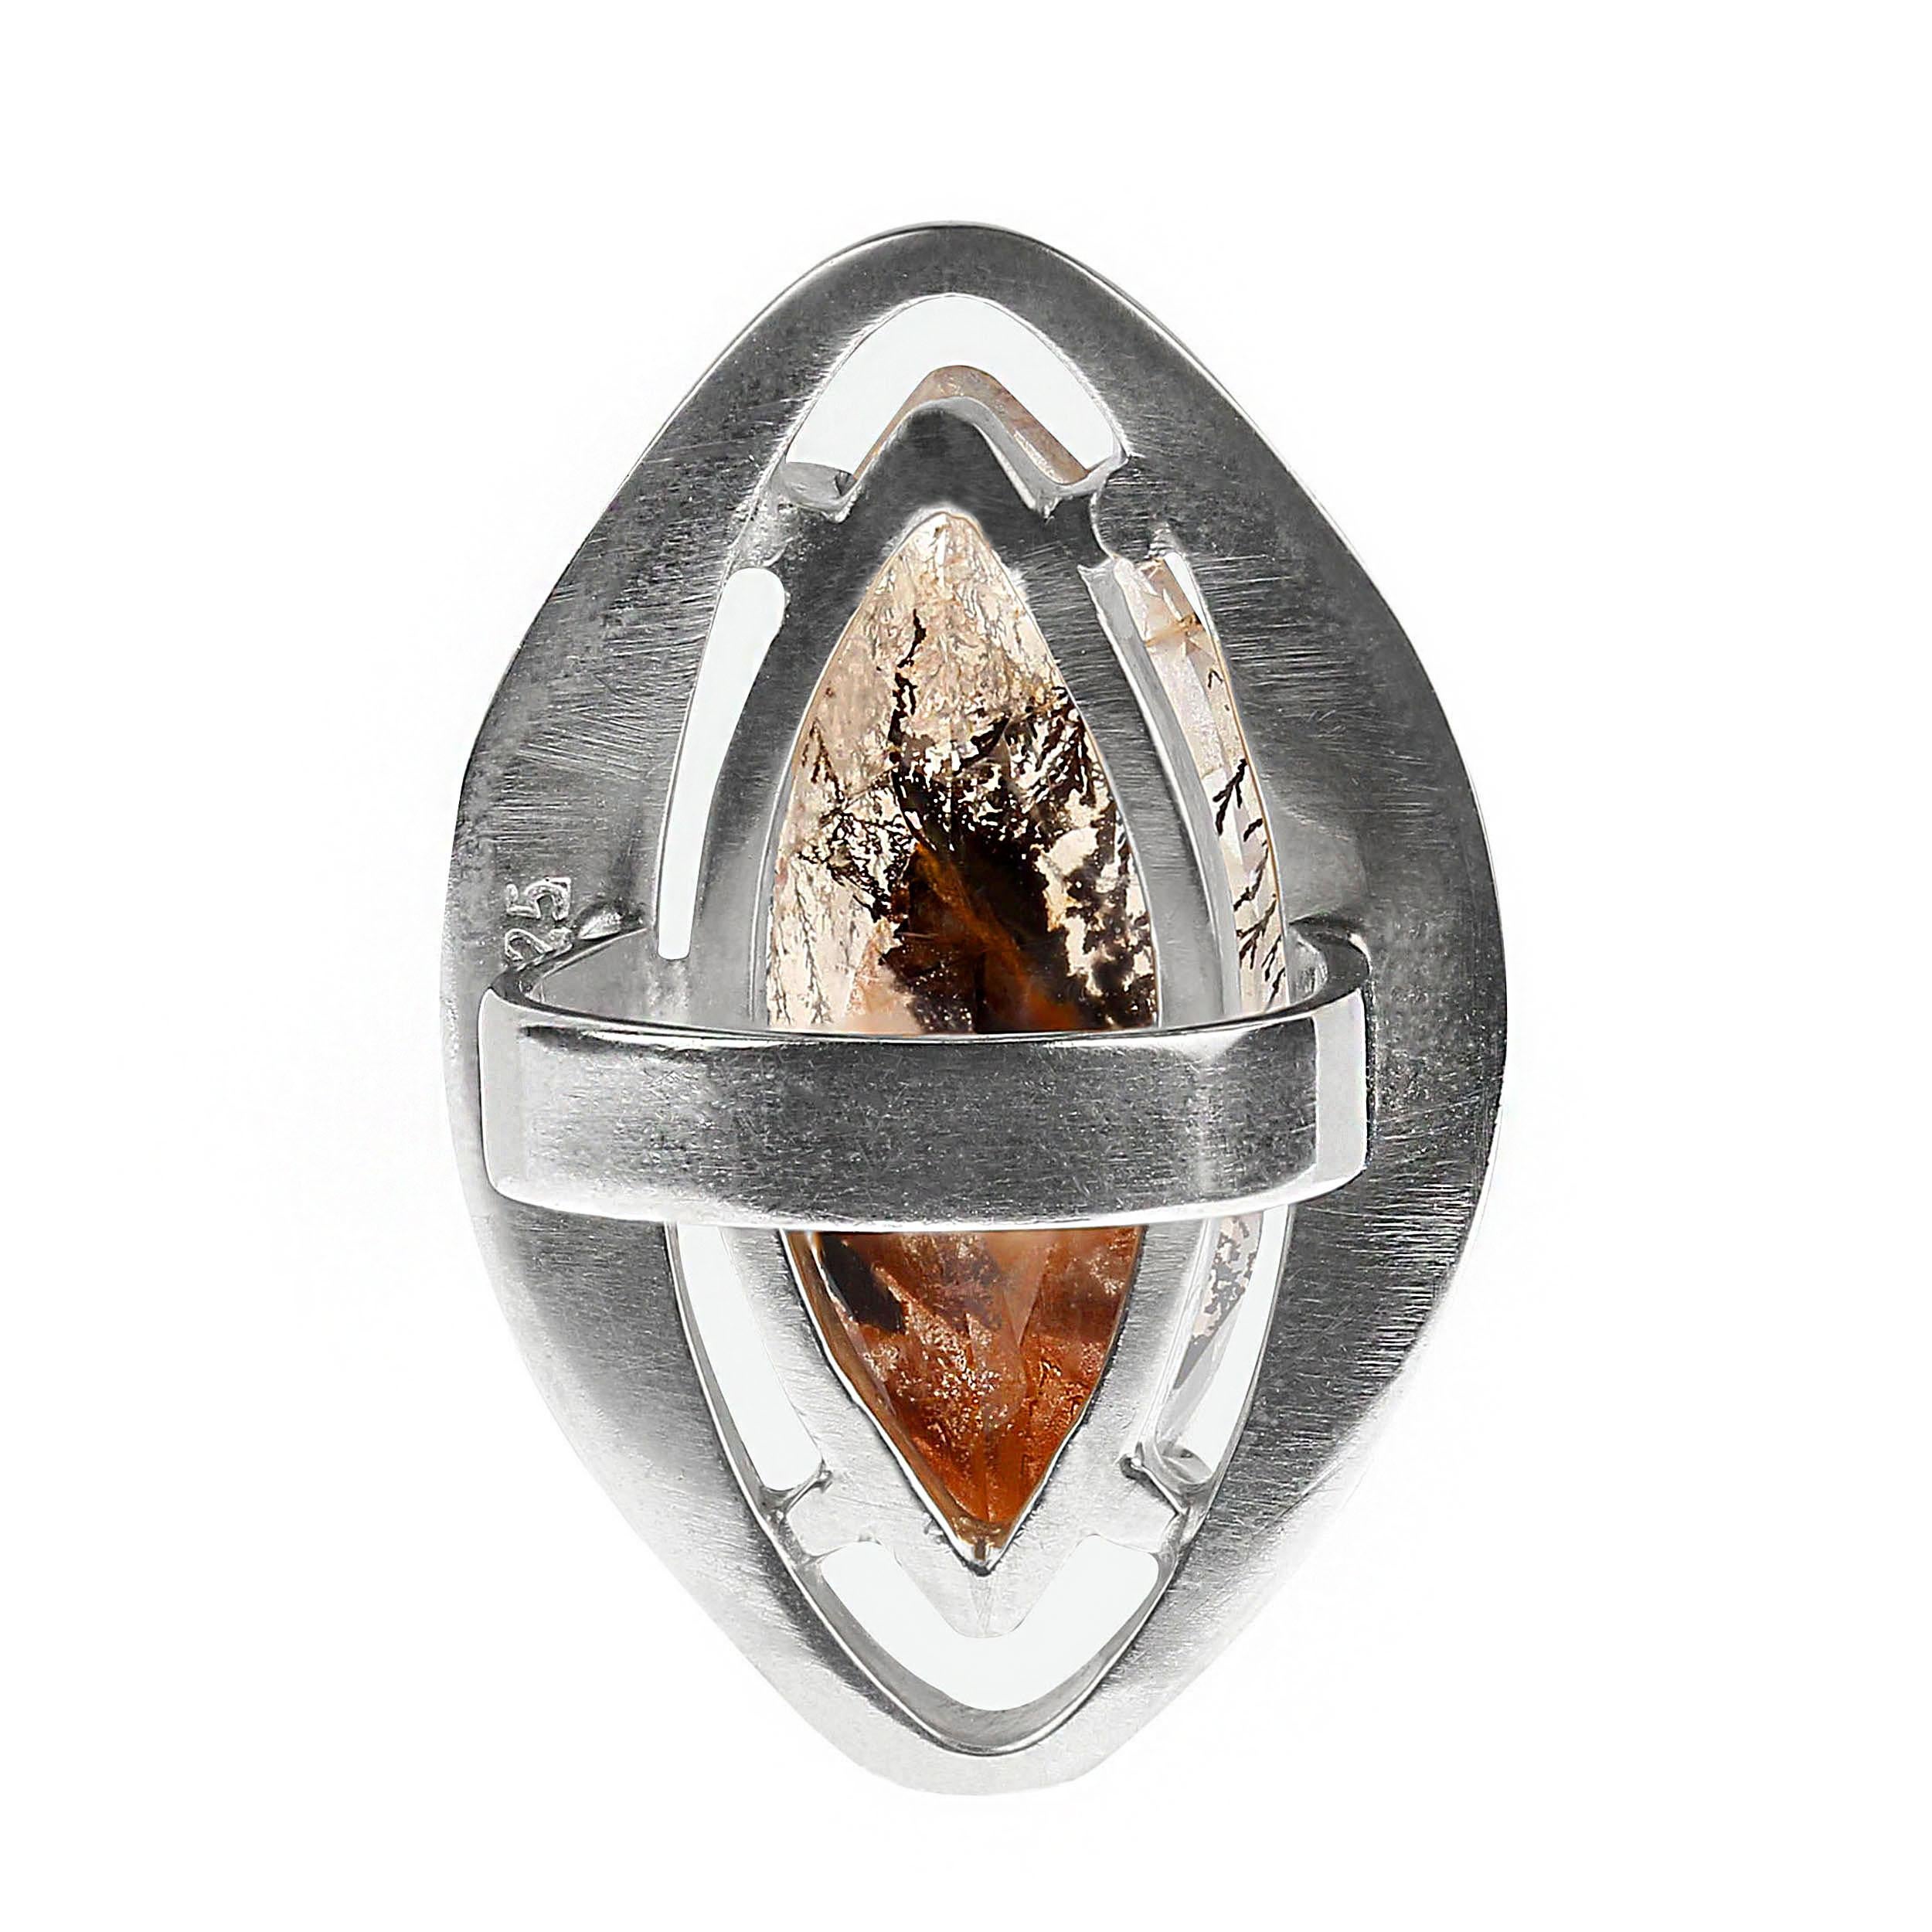 AJD Dramatic Black & Orange Dendritic Quartz in Handmade Sterling Silver Ring  In Excellent Condition For Sale In Raleigh, NC